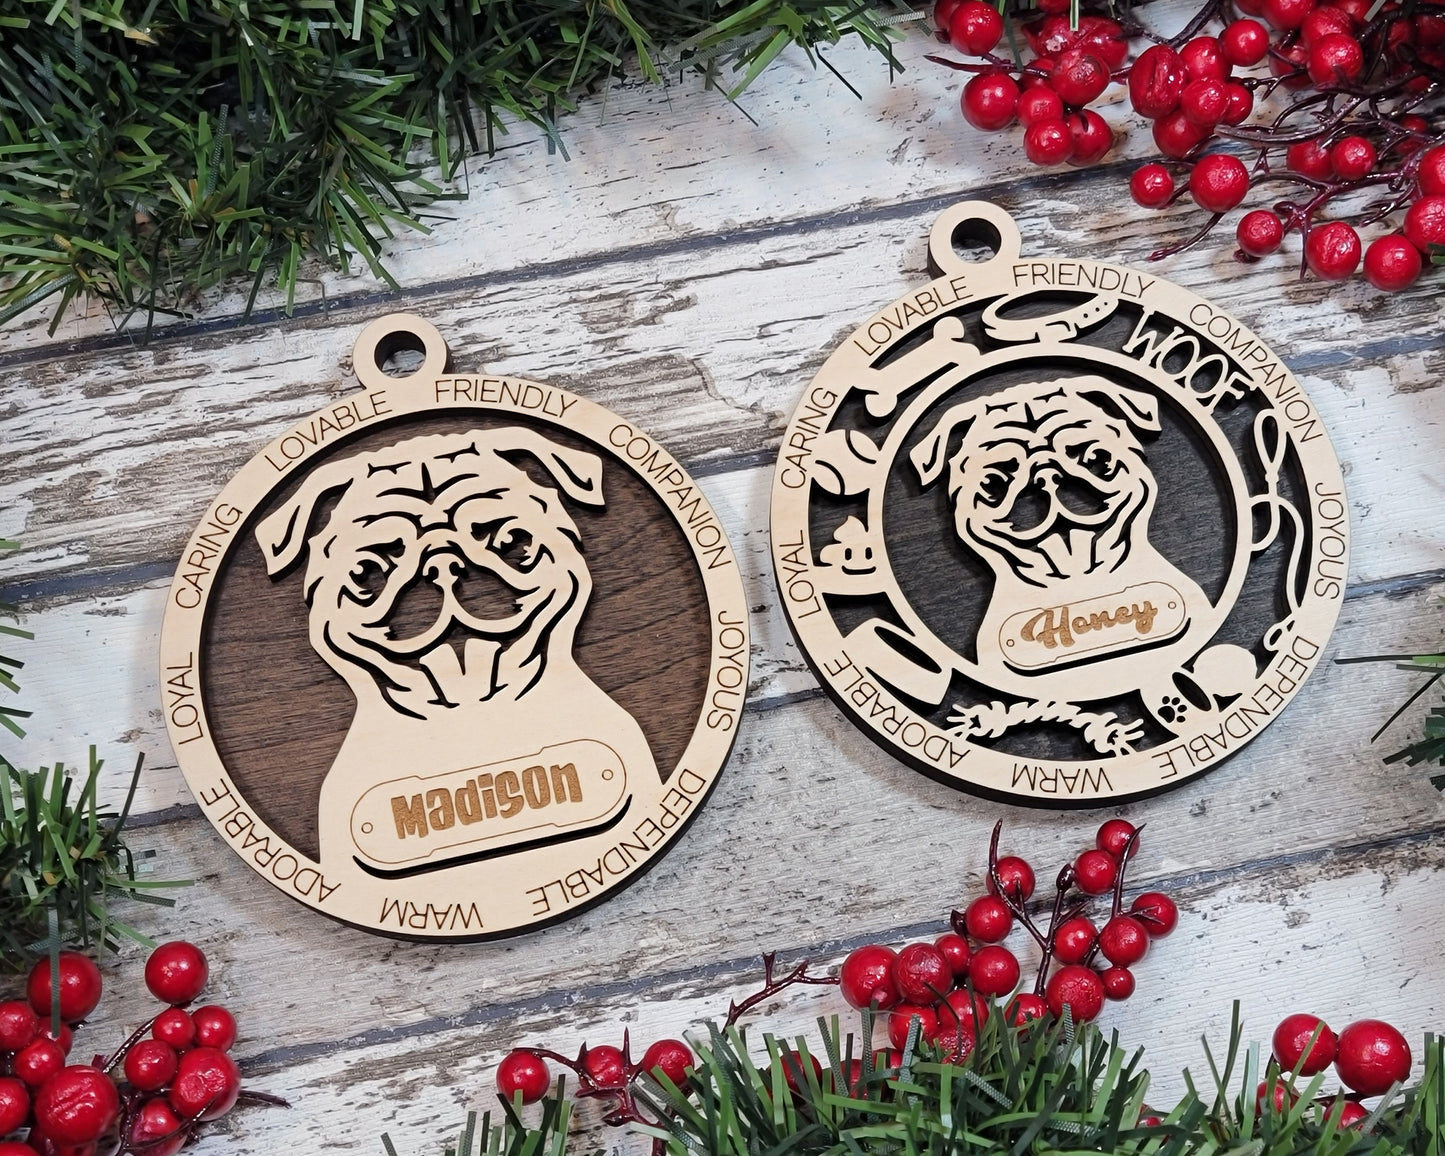 Pug - Adorable Dog Ornaments - 2 Ornaments included - SVG, PDF, AI File Download - Sized for Glowforge